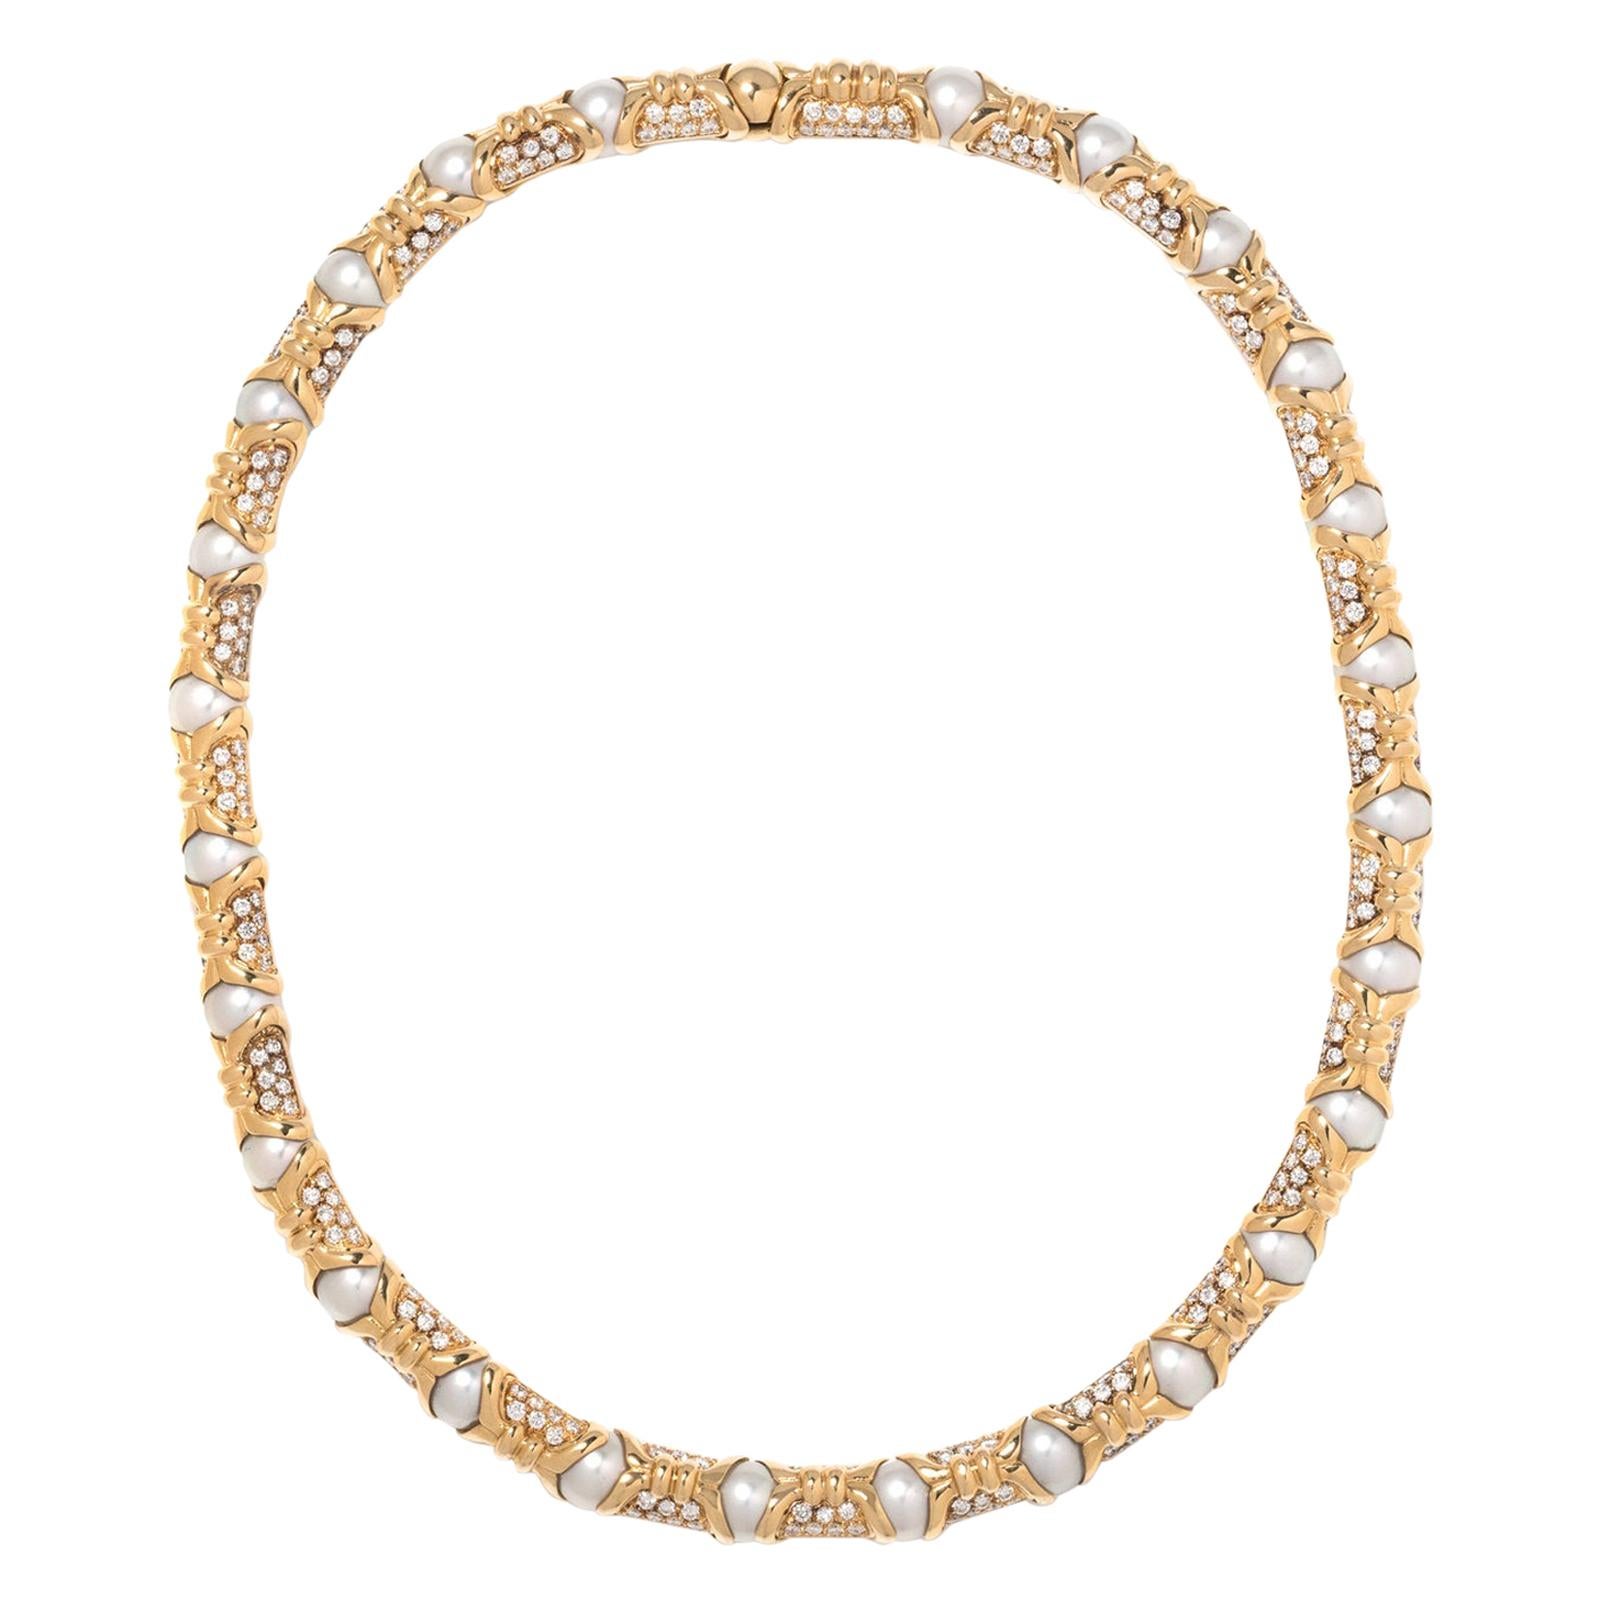 Bvlgari, Yellow Gold Diamond and Cultured Pearl Necklace